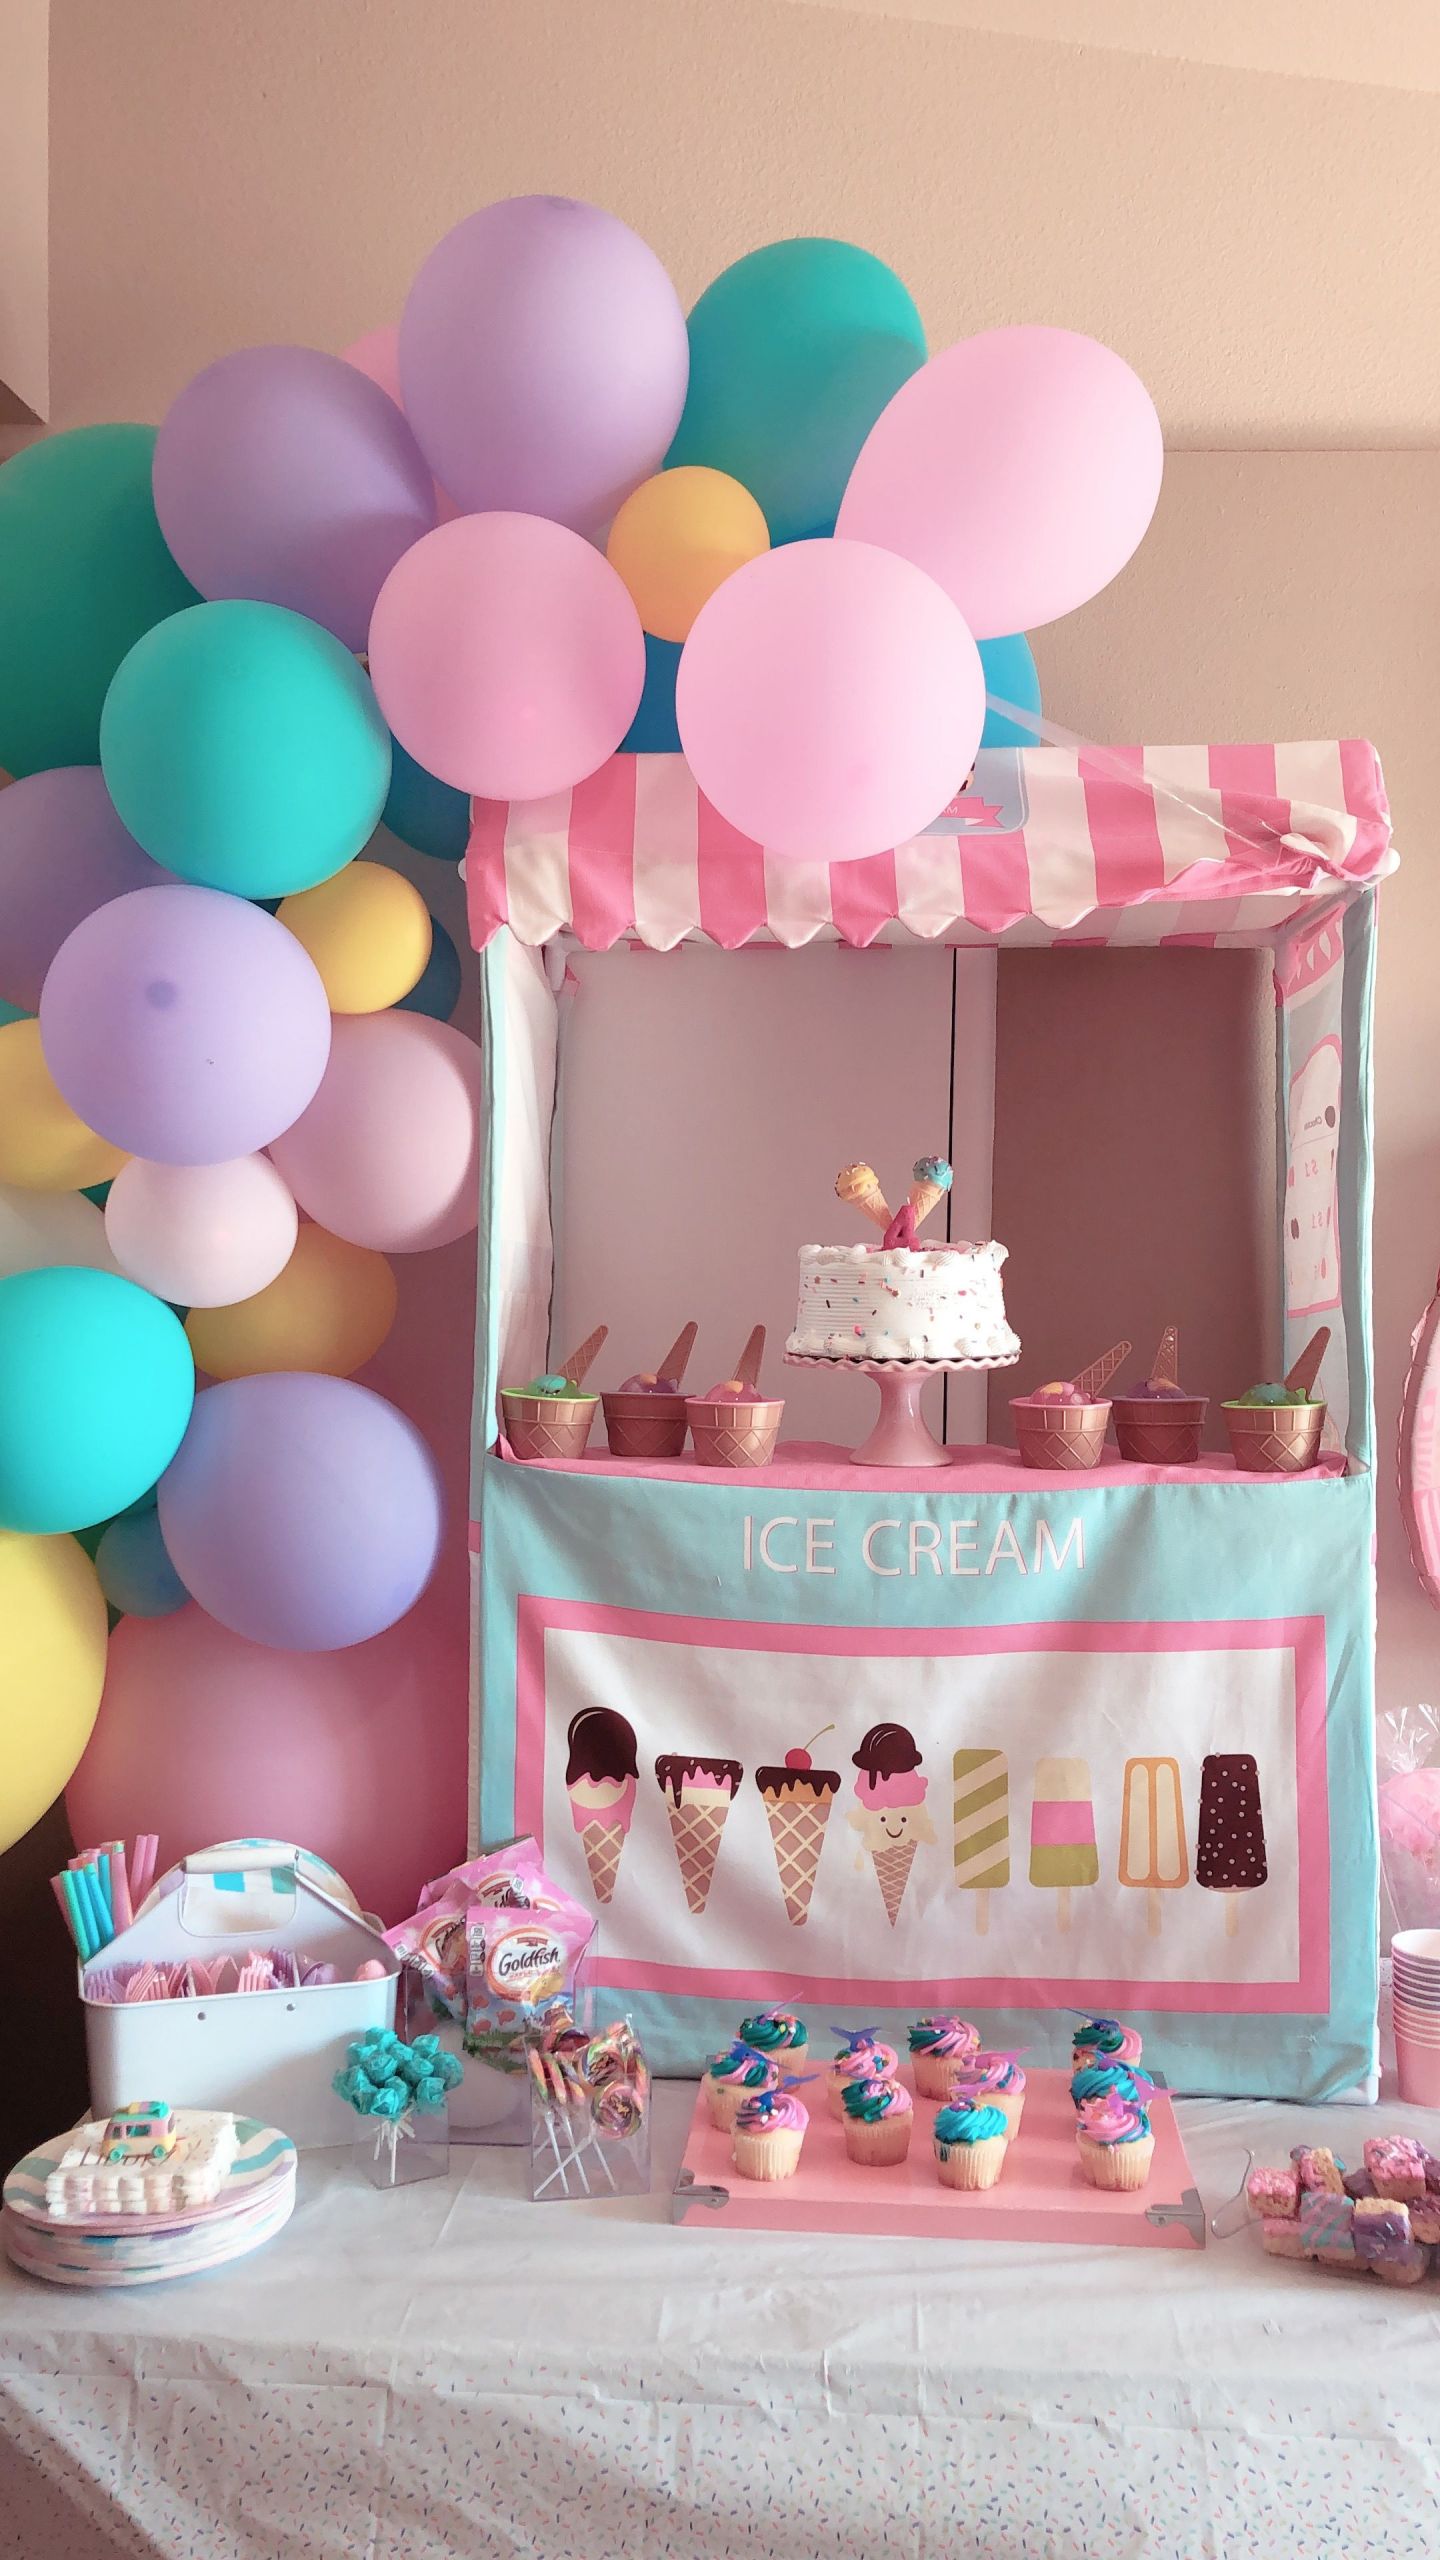 Birthday Party Ideas For 2 Year Old Girl
 Ice cream birthday party for my 4 year old in 2019